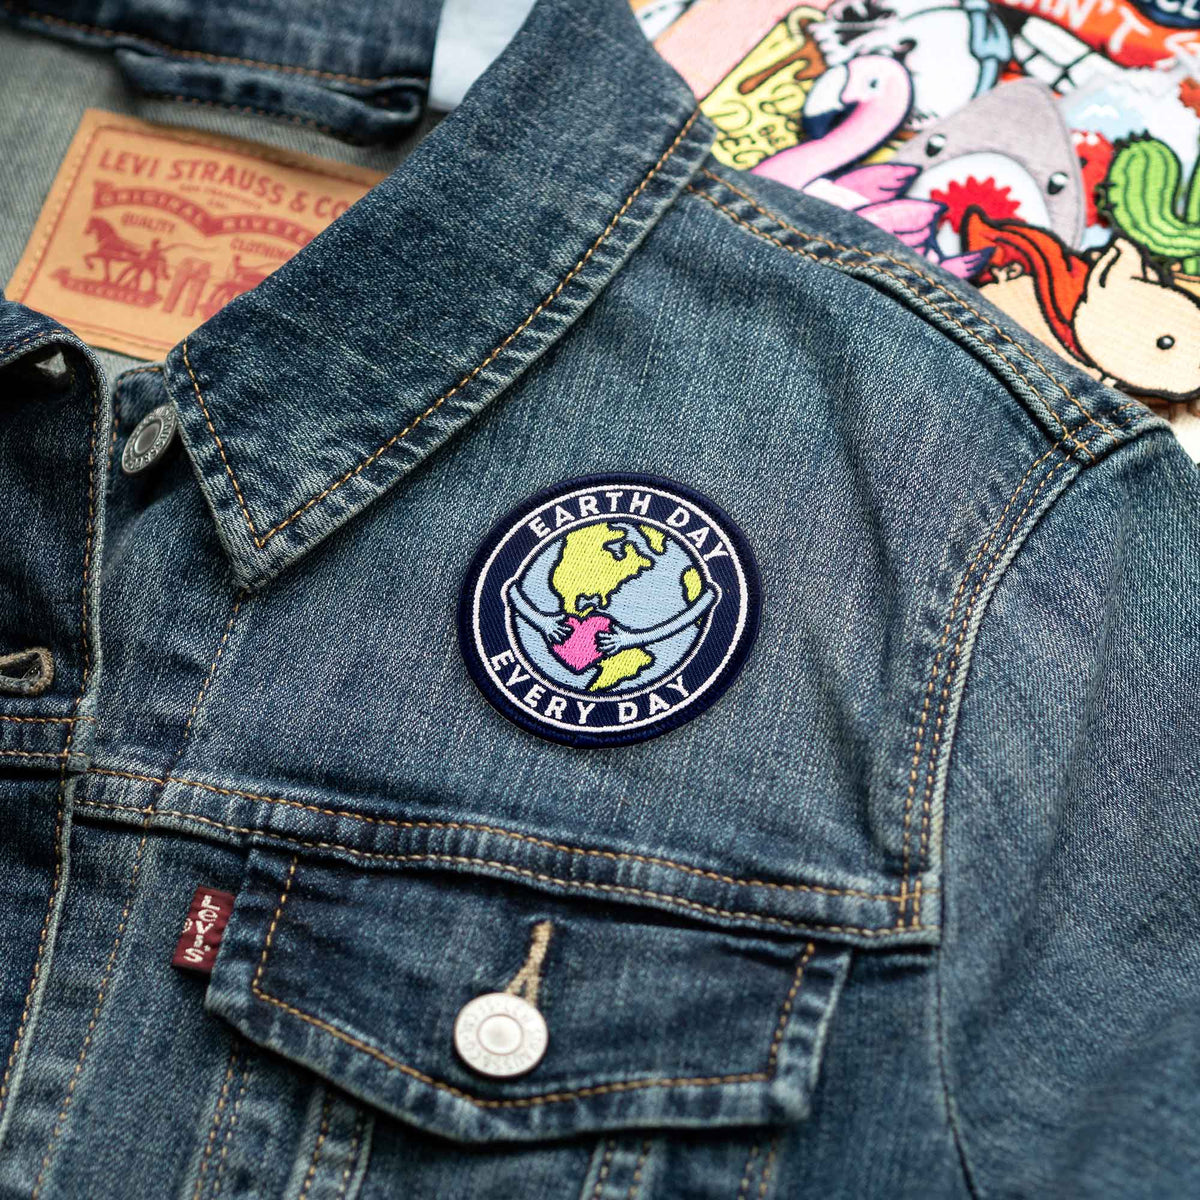 Earth Day Every Day patch on denim jacket